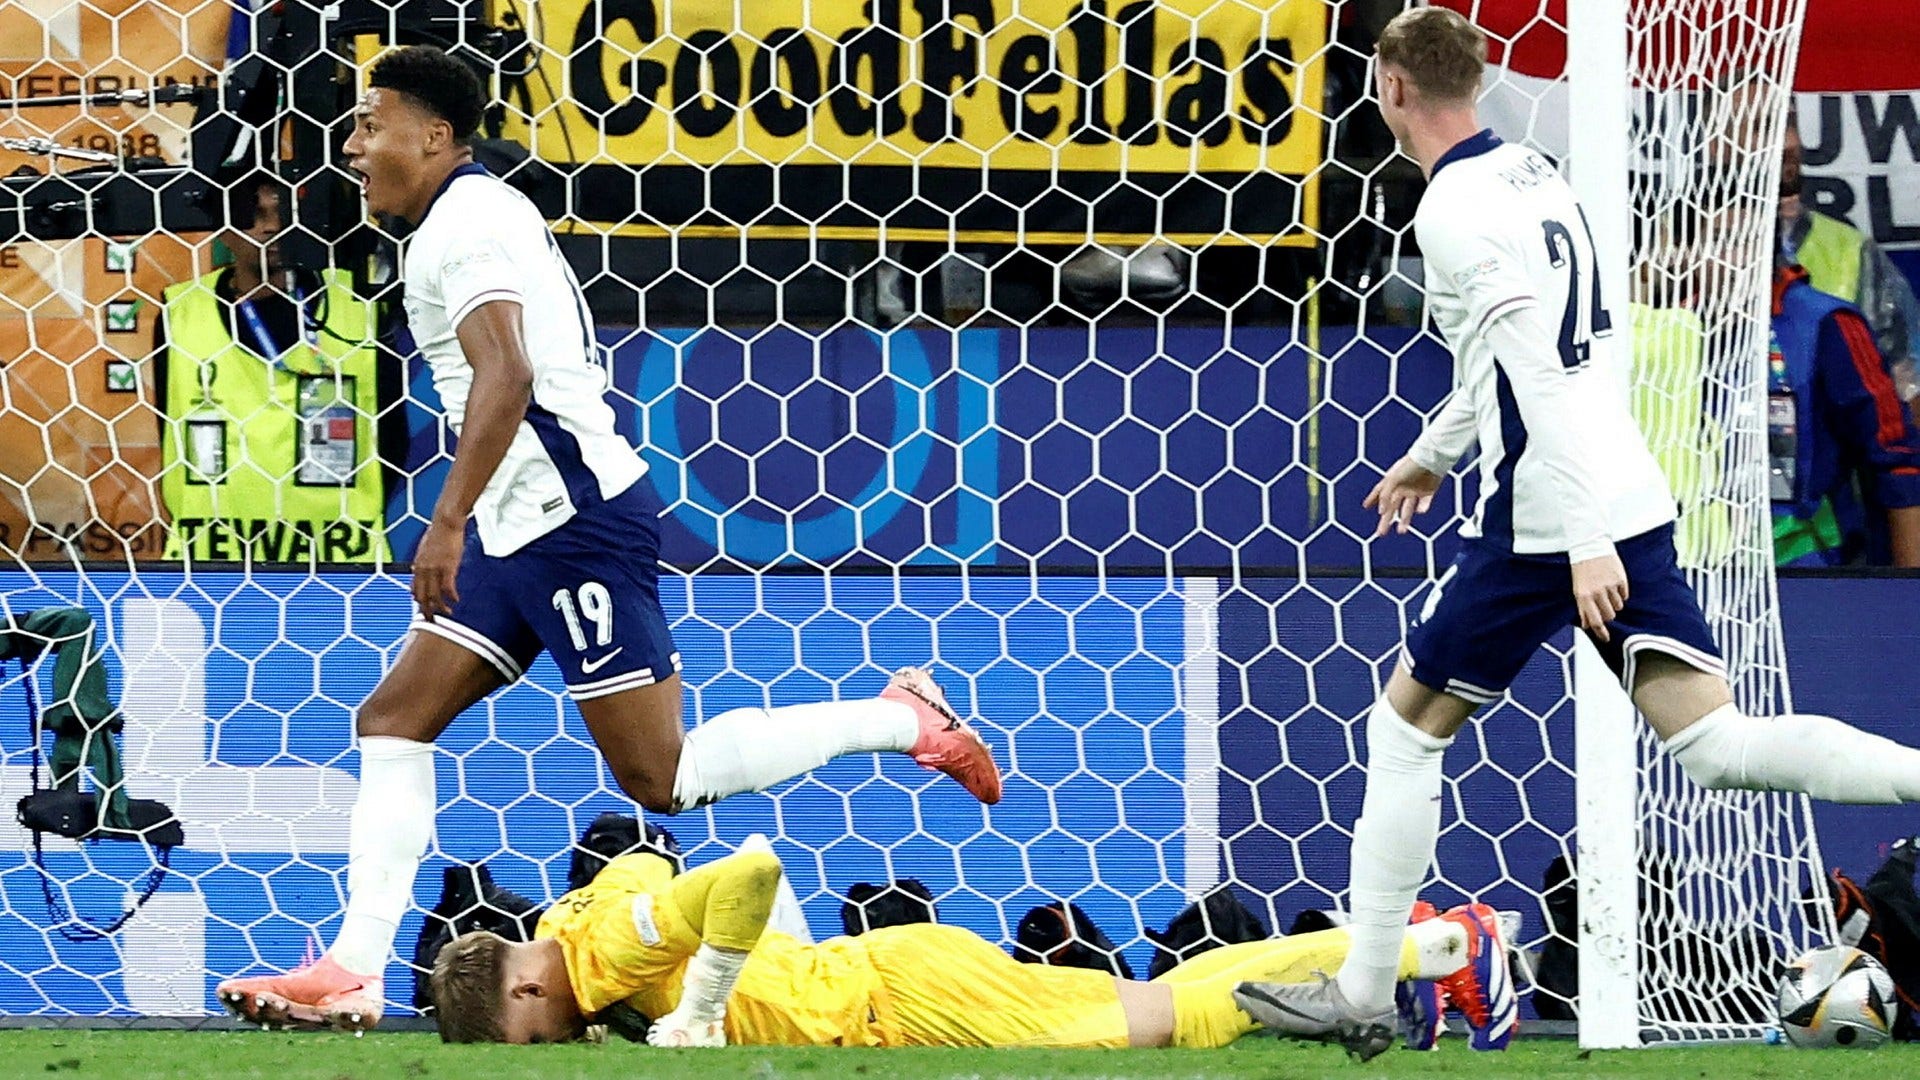 England into European Championship final after last-minute goal